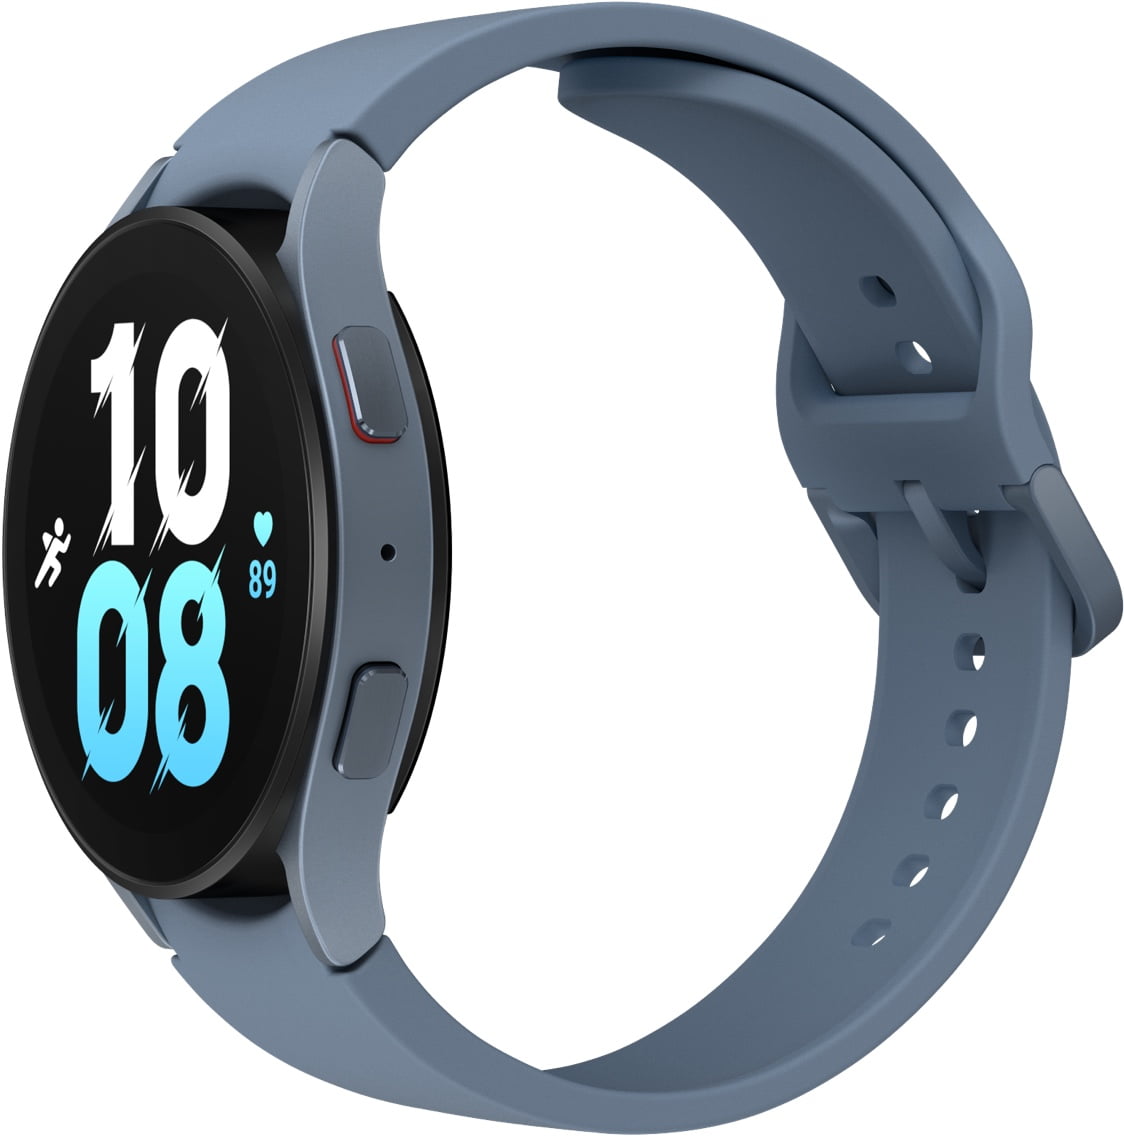 Modern A8 Smartwatch For Fitness And Health 